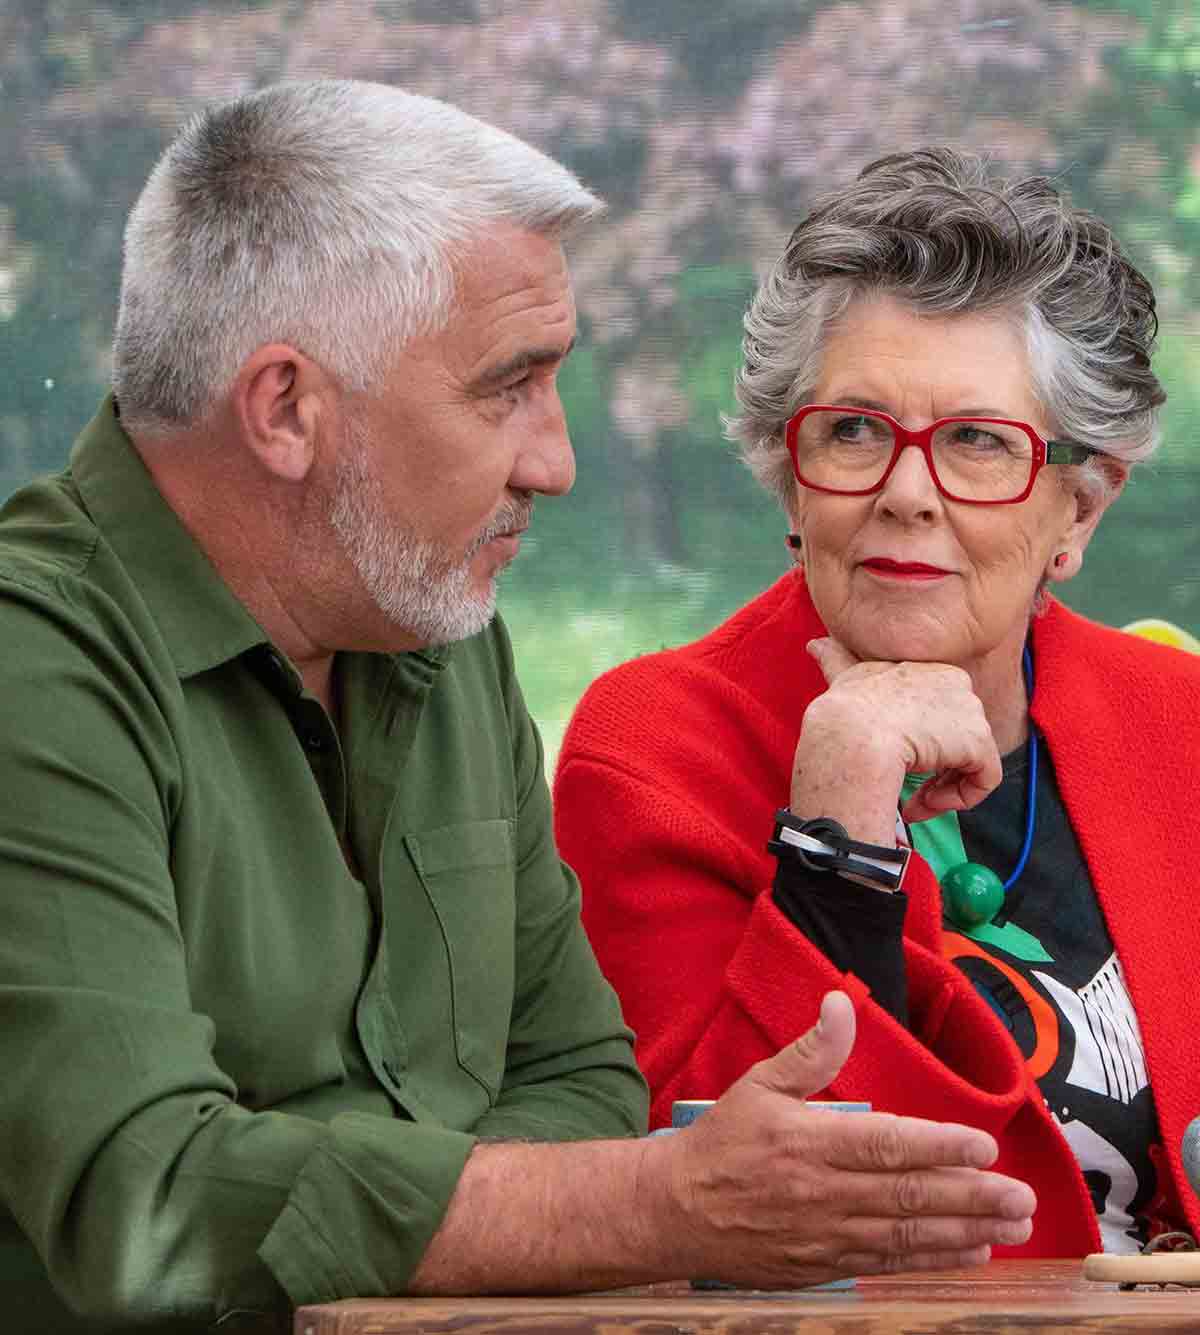 An image of Paul Hollywood and Prue Leith on the set of the Great British Bake Off.